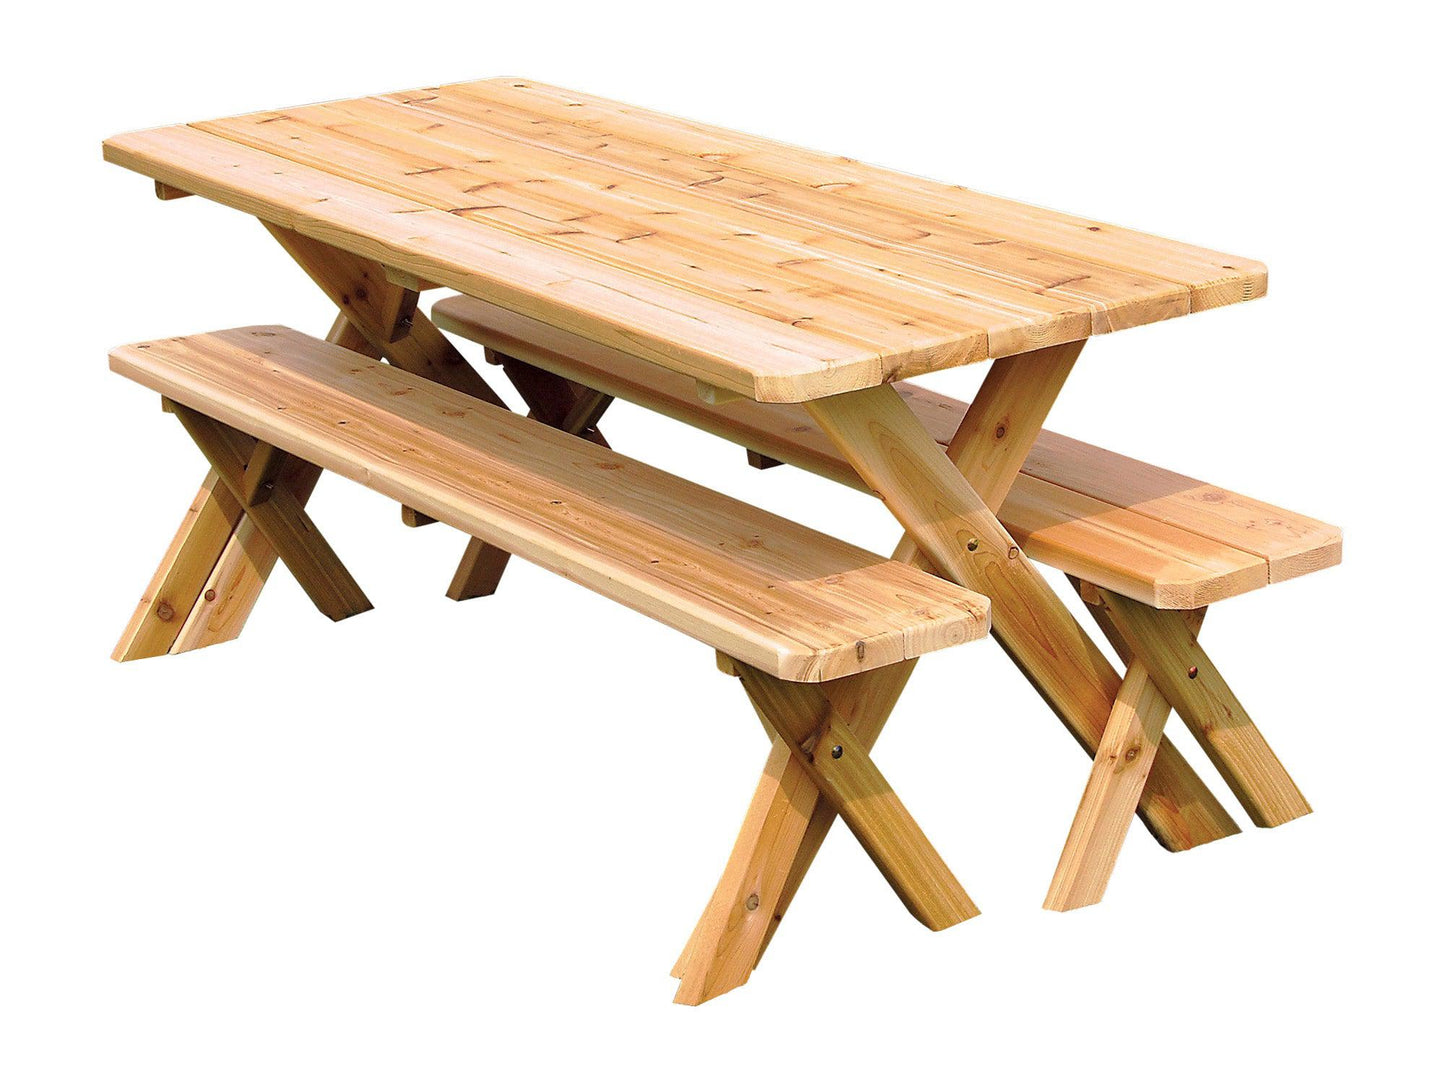 Regallion Outdoor Western Red Cedar 8' Cross-leg Picnic Table w/4  4' Benches - LEAD TIME TO SHIP 2 WEEKS